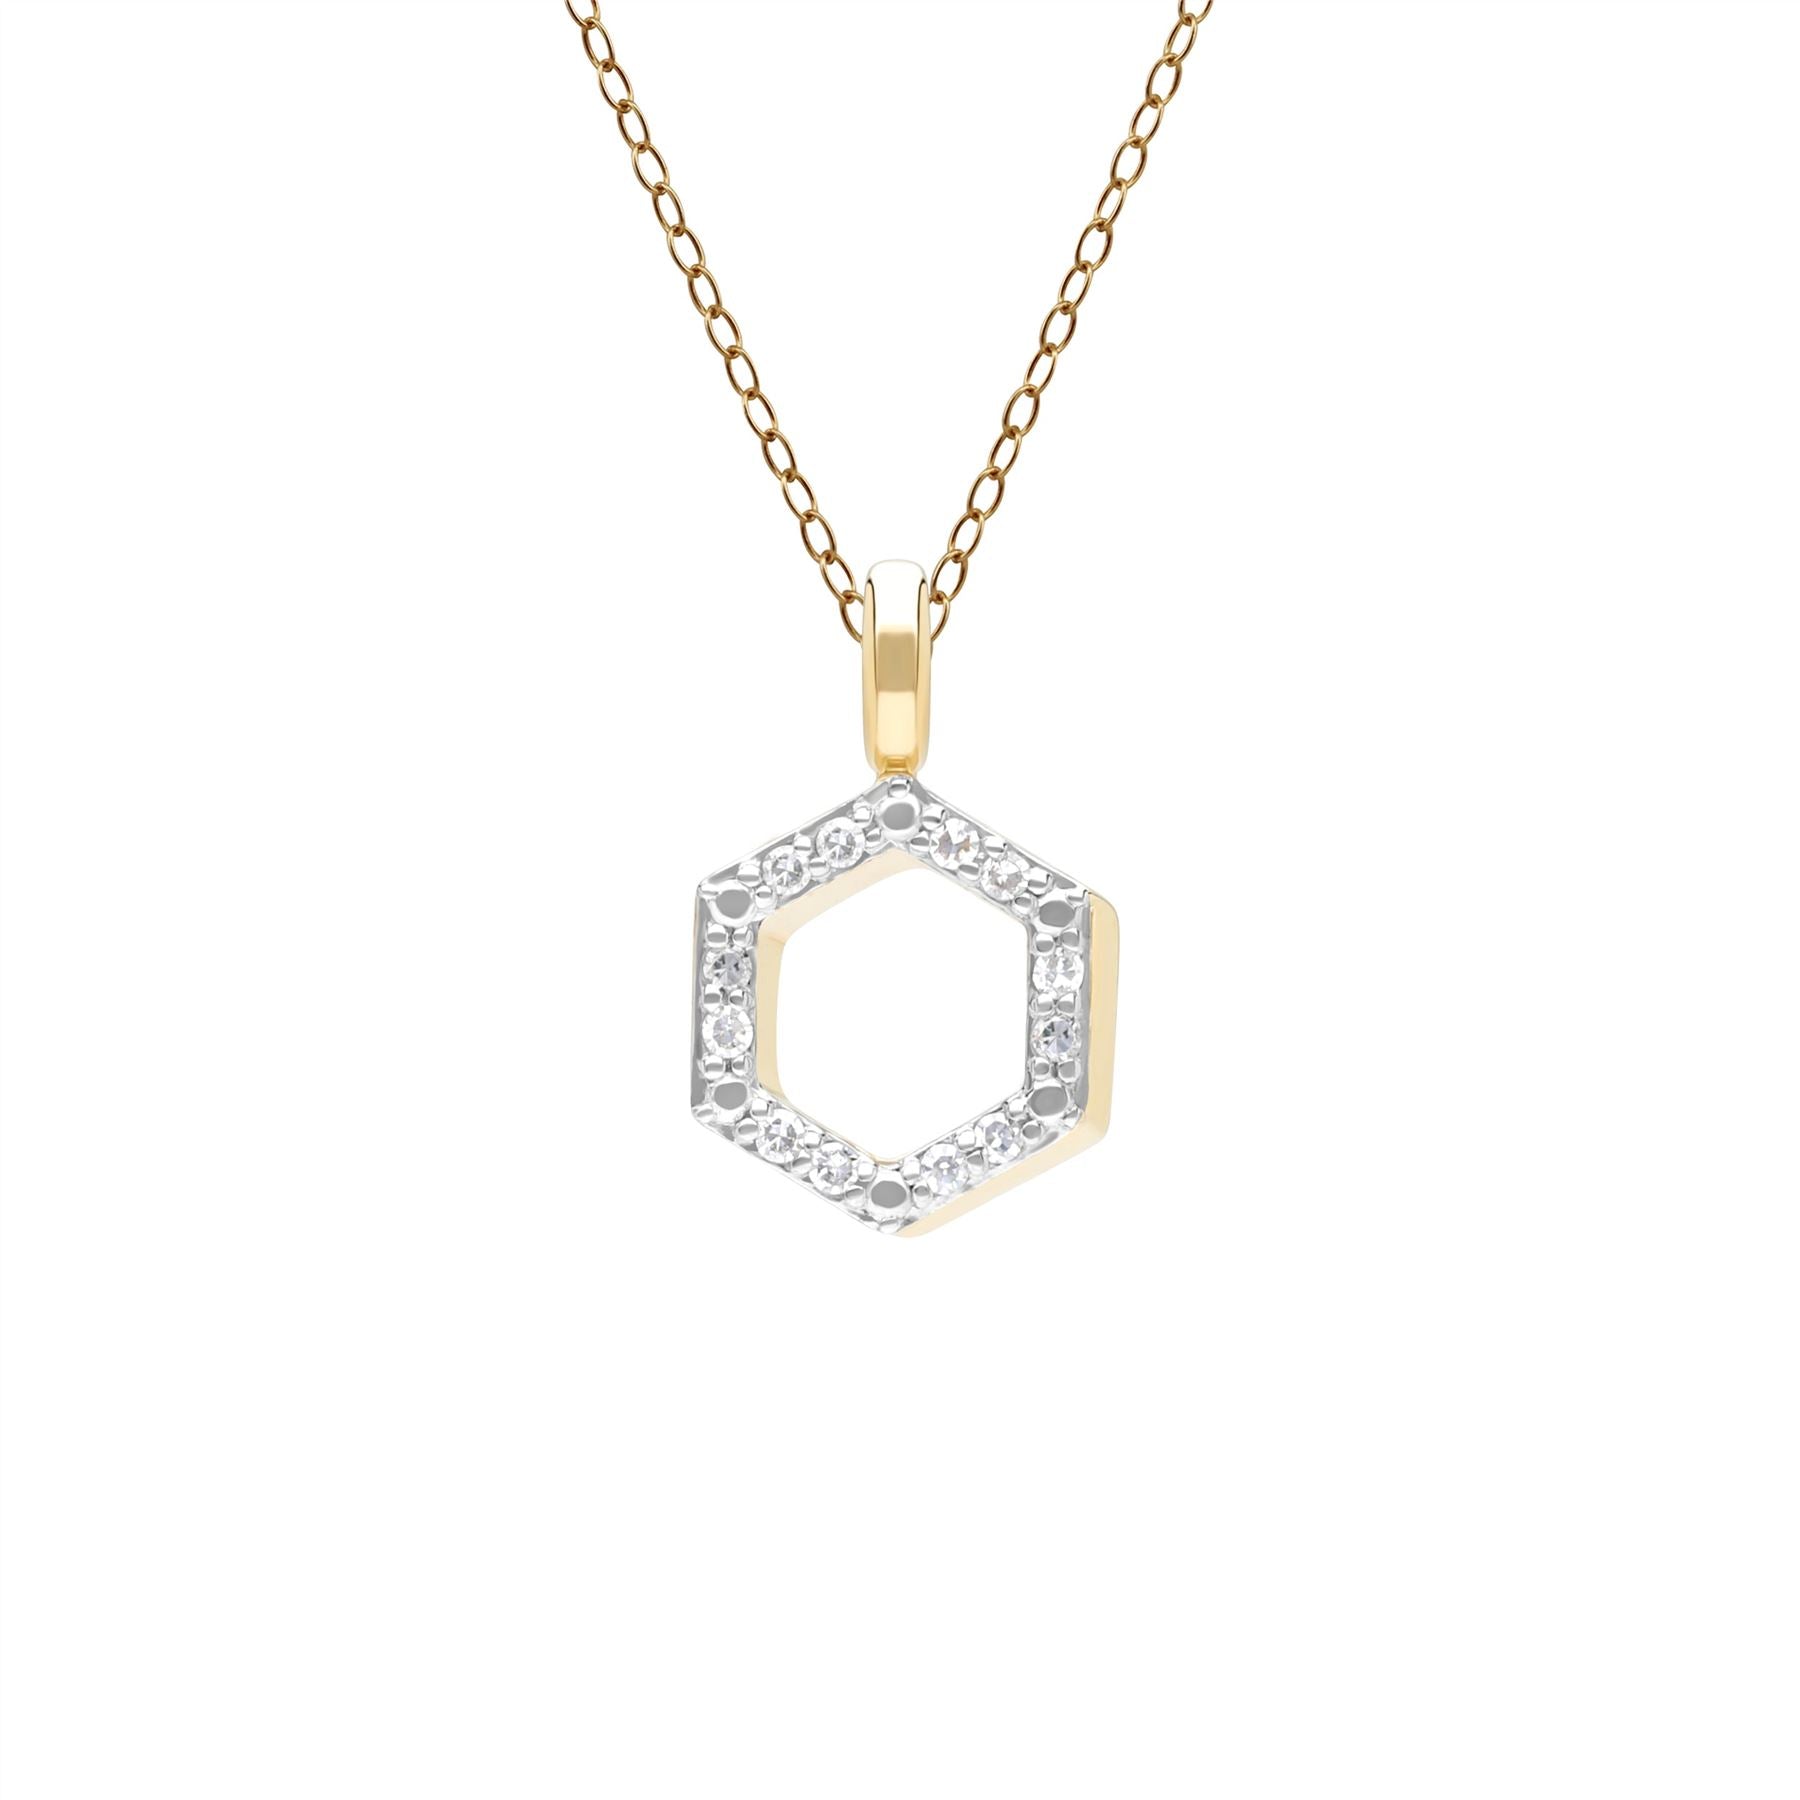 Geometric Hex Diamond Pendant Necklace in 9ct Yellow Gold Front